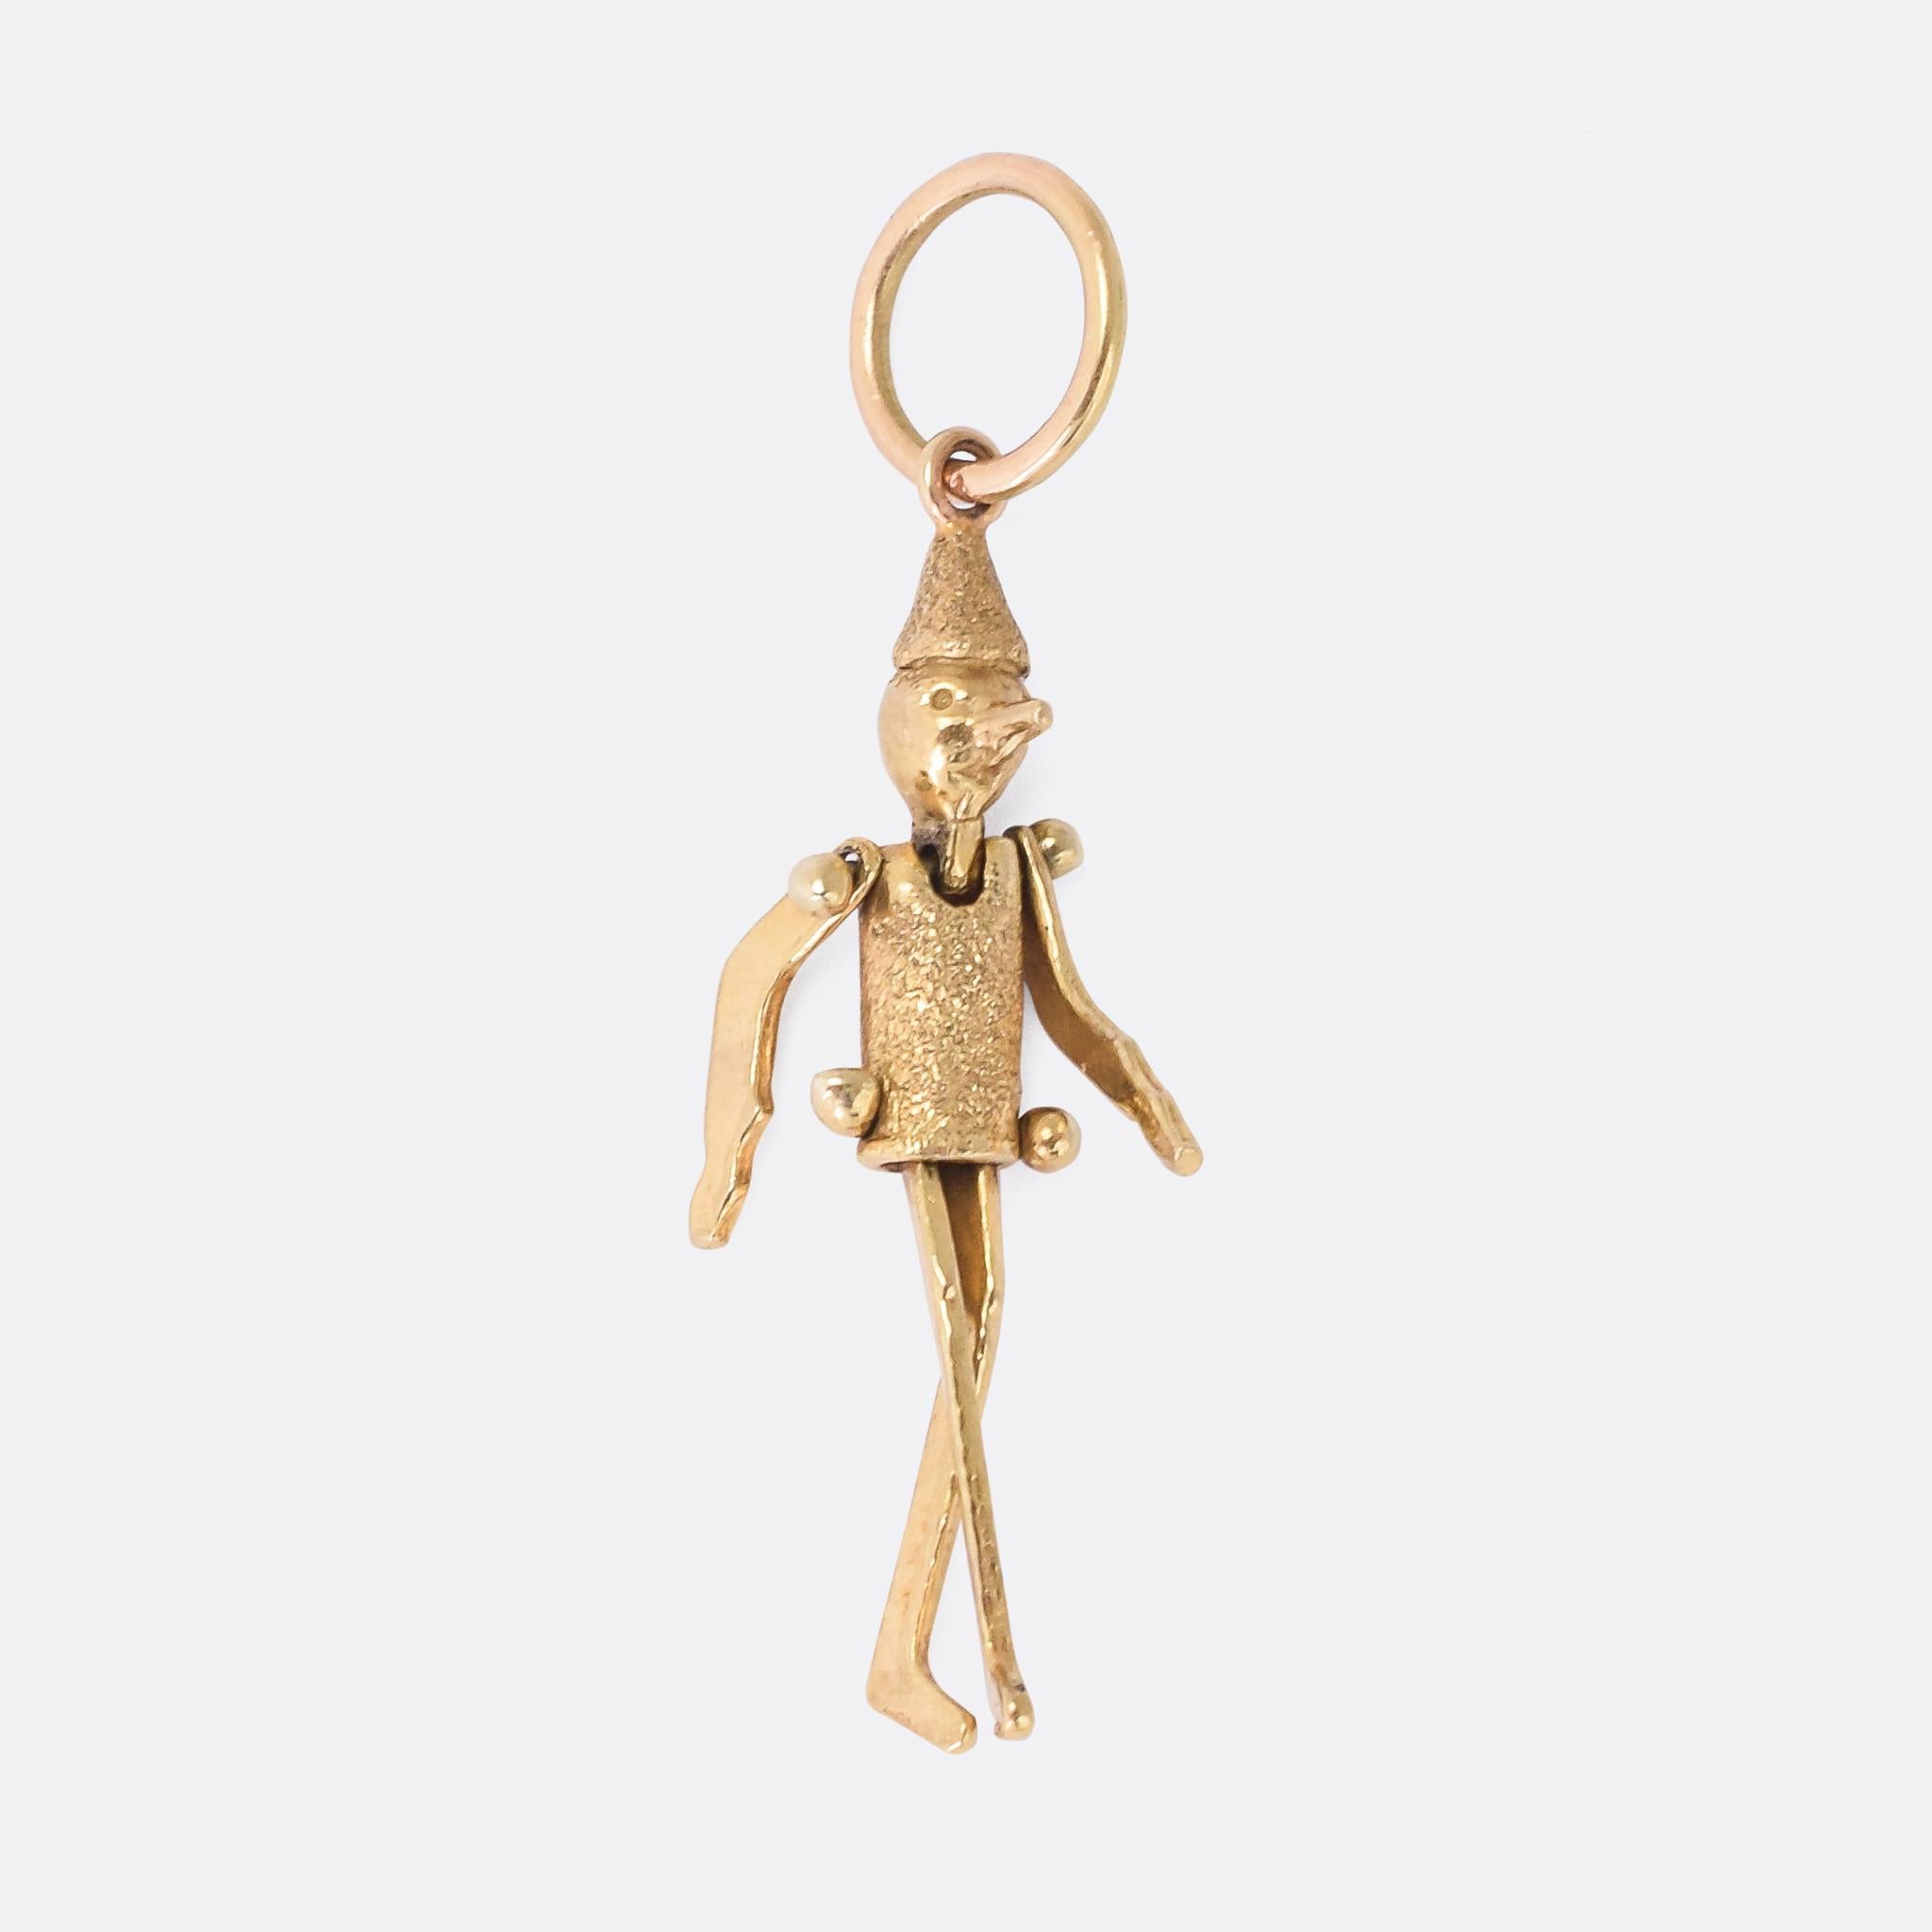 A charming antique Pinocchio in 15 karat gold. His arms and legs are fully articulated and jiggle around as it's worn. The 1940 Disney film adaptation raised Pinocchio to the cultural icon status, but the story was first penned by Carlo Collodi in